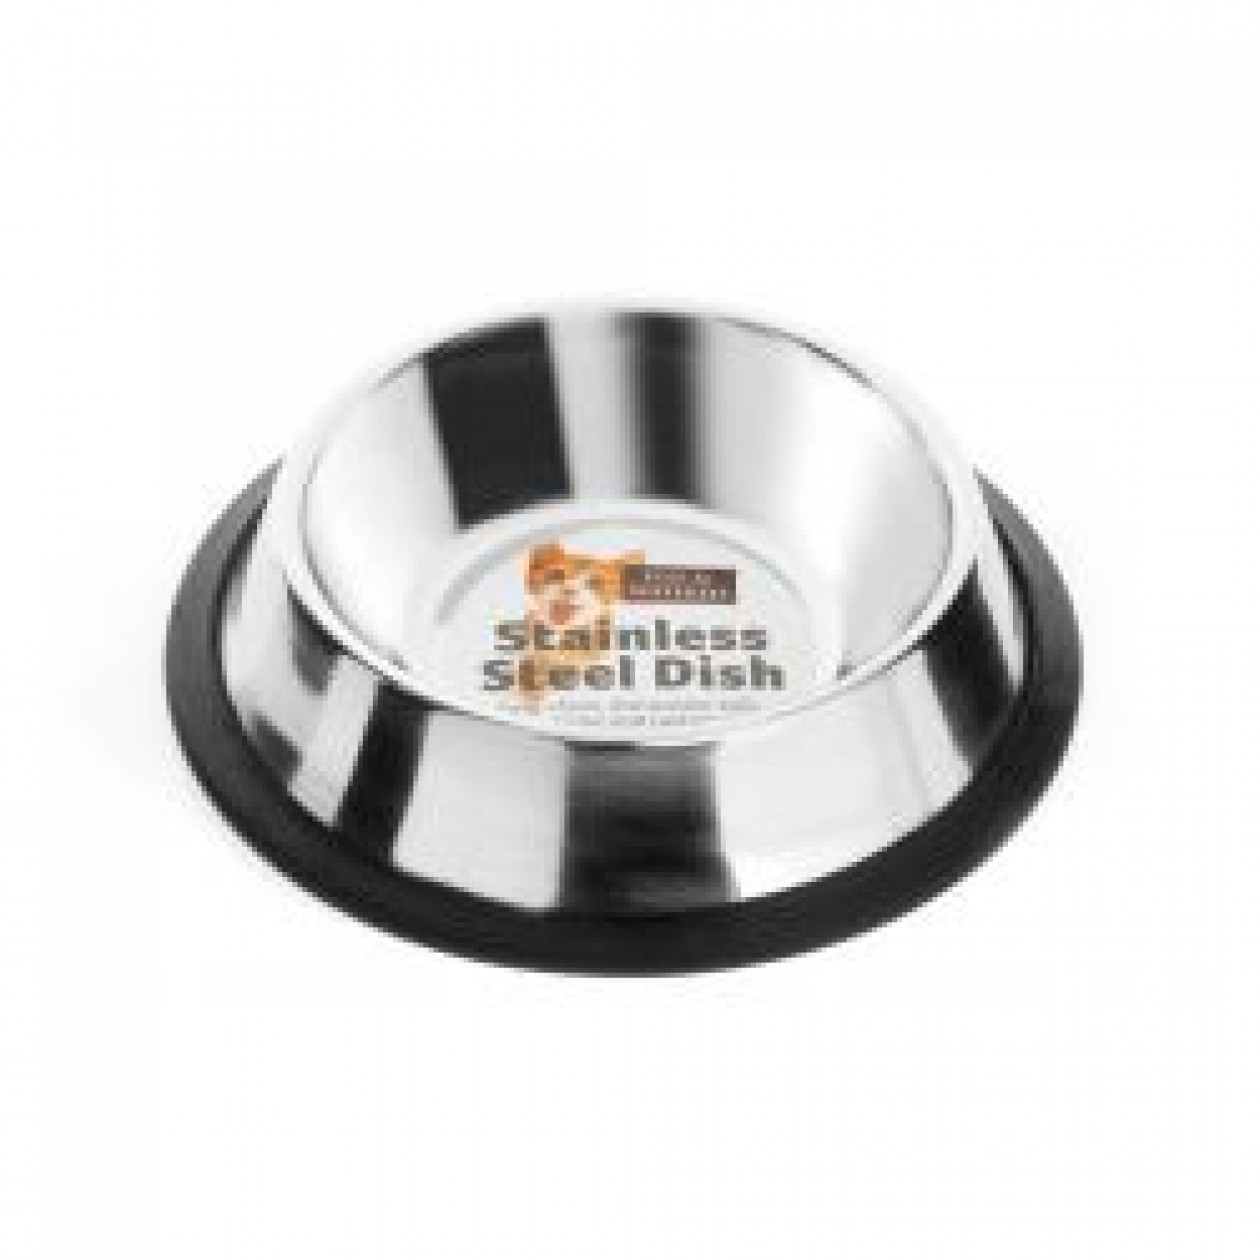 Fed 'N' Watered Stainless Steel Non Tip Cat Dish, 15cm